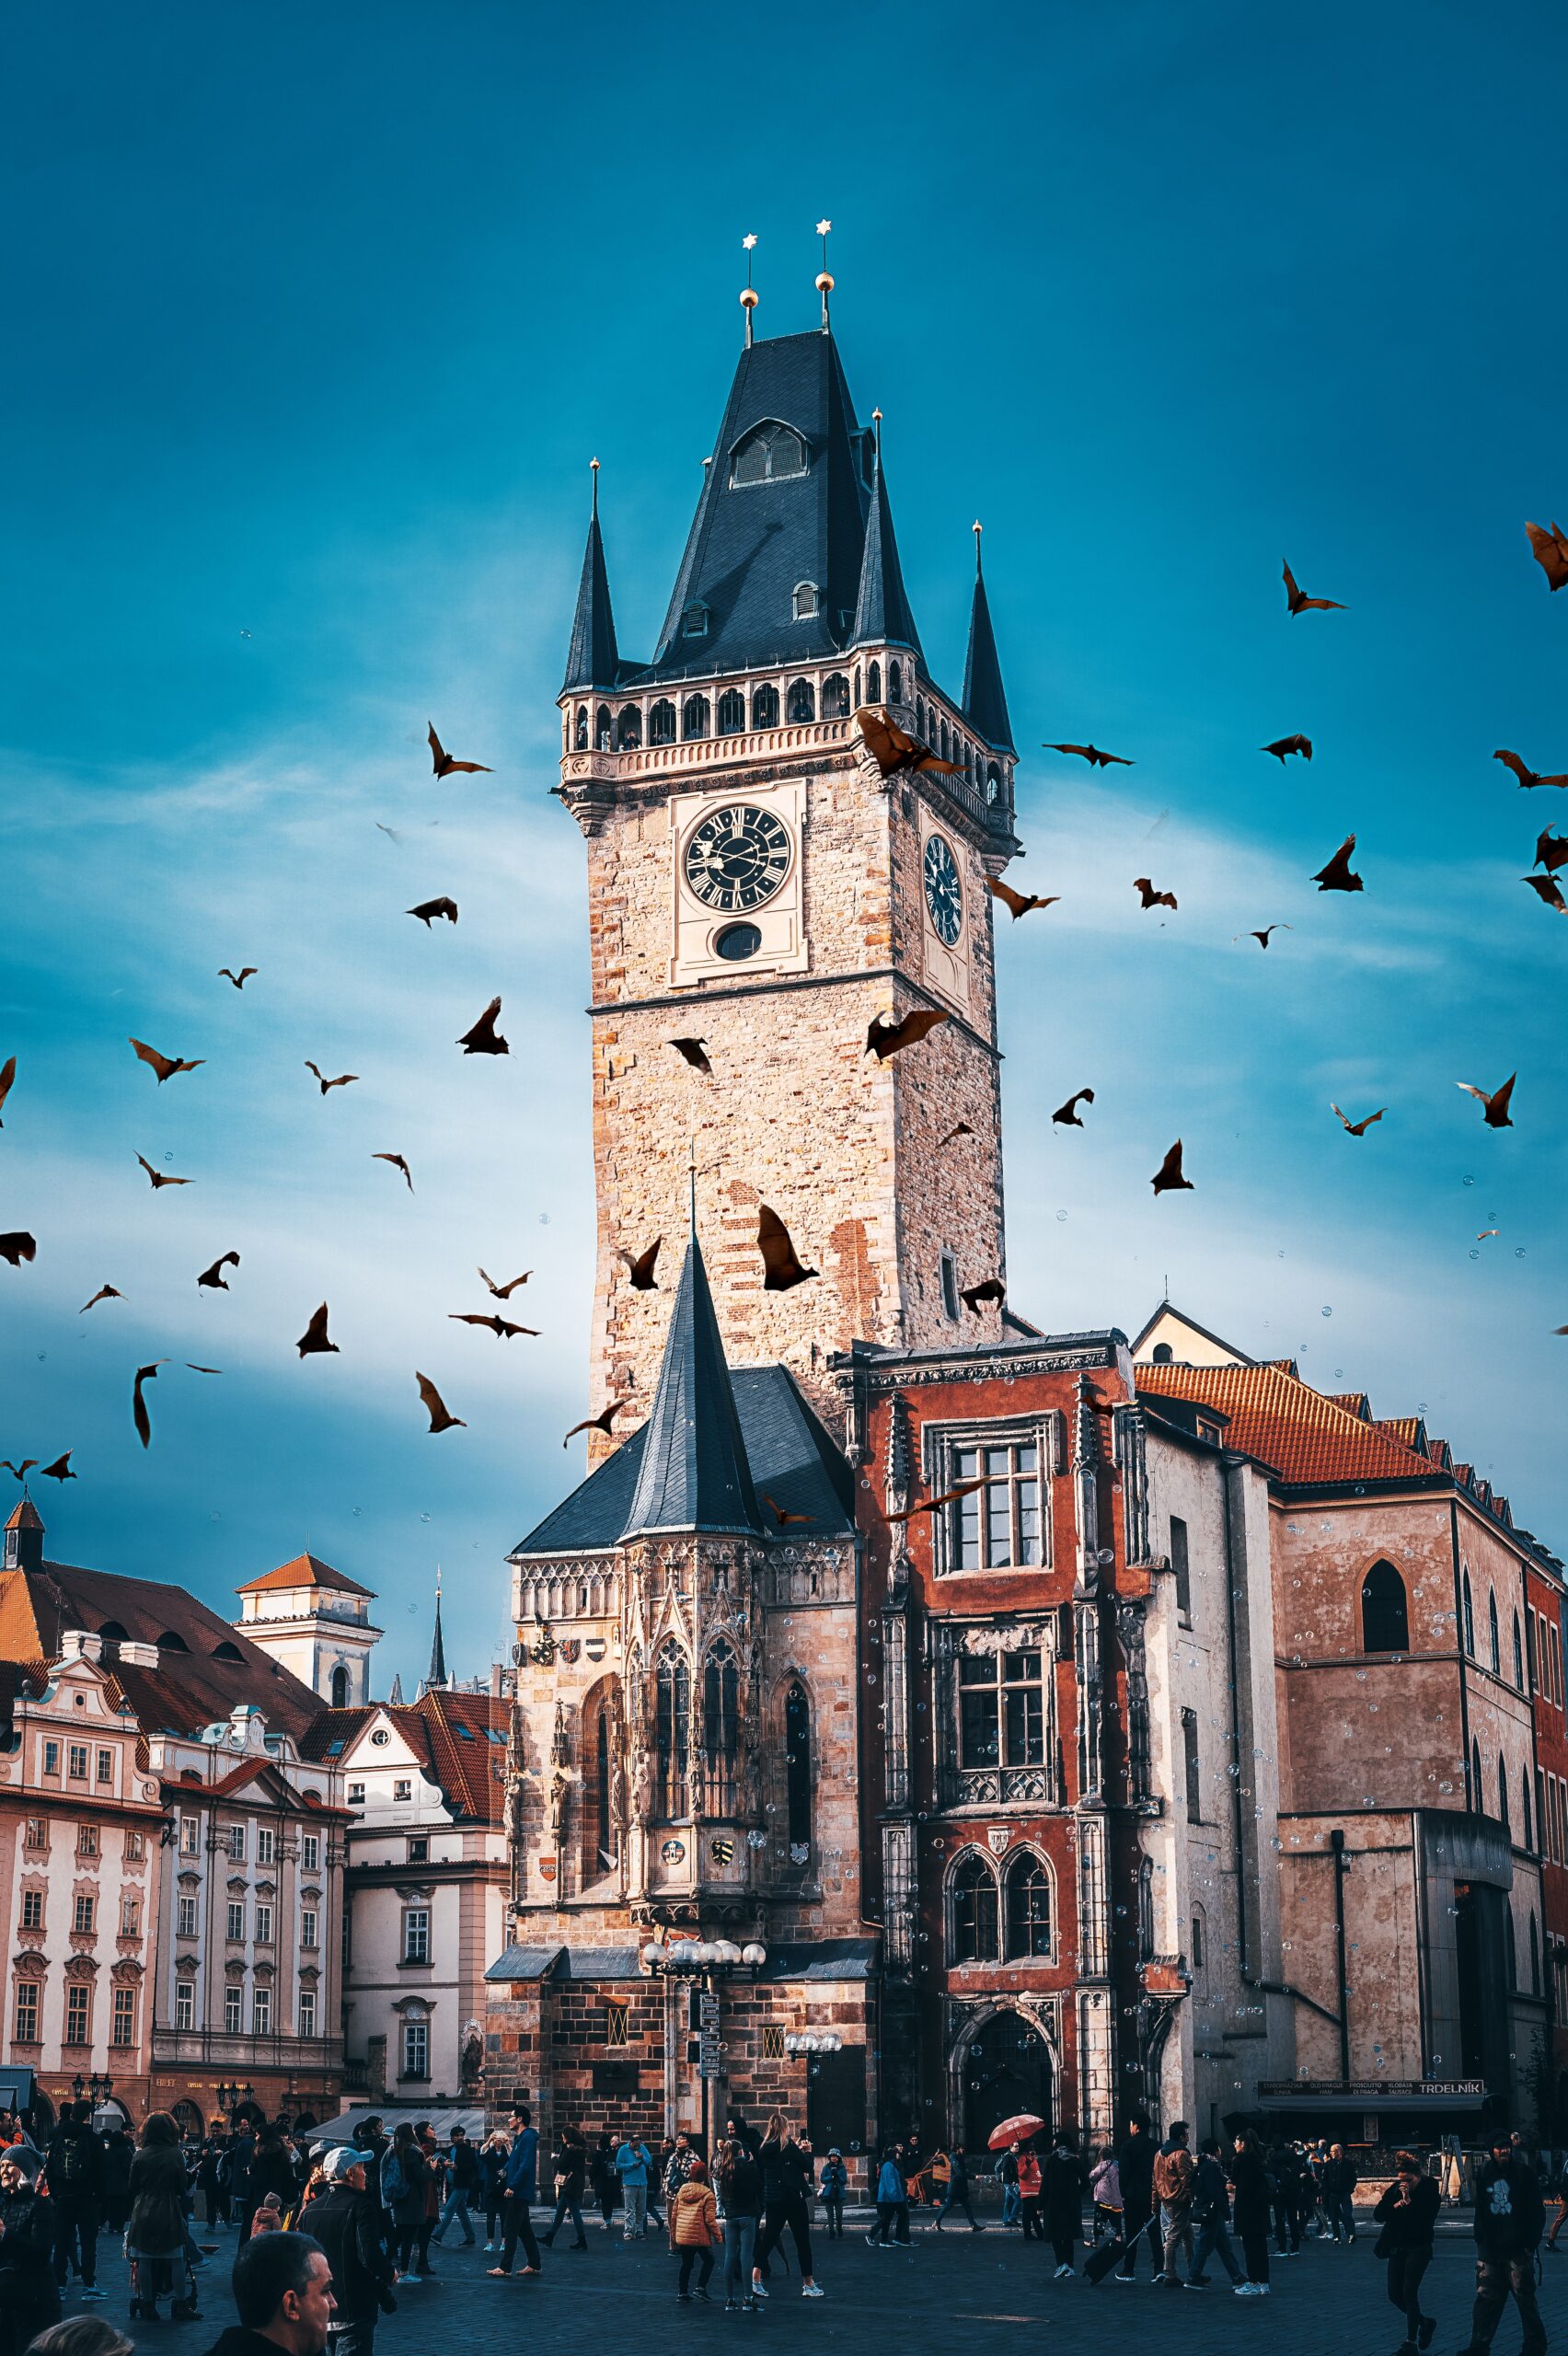 When is the best time to visit Prague?